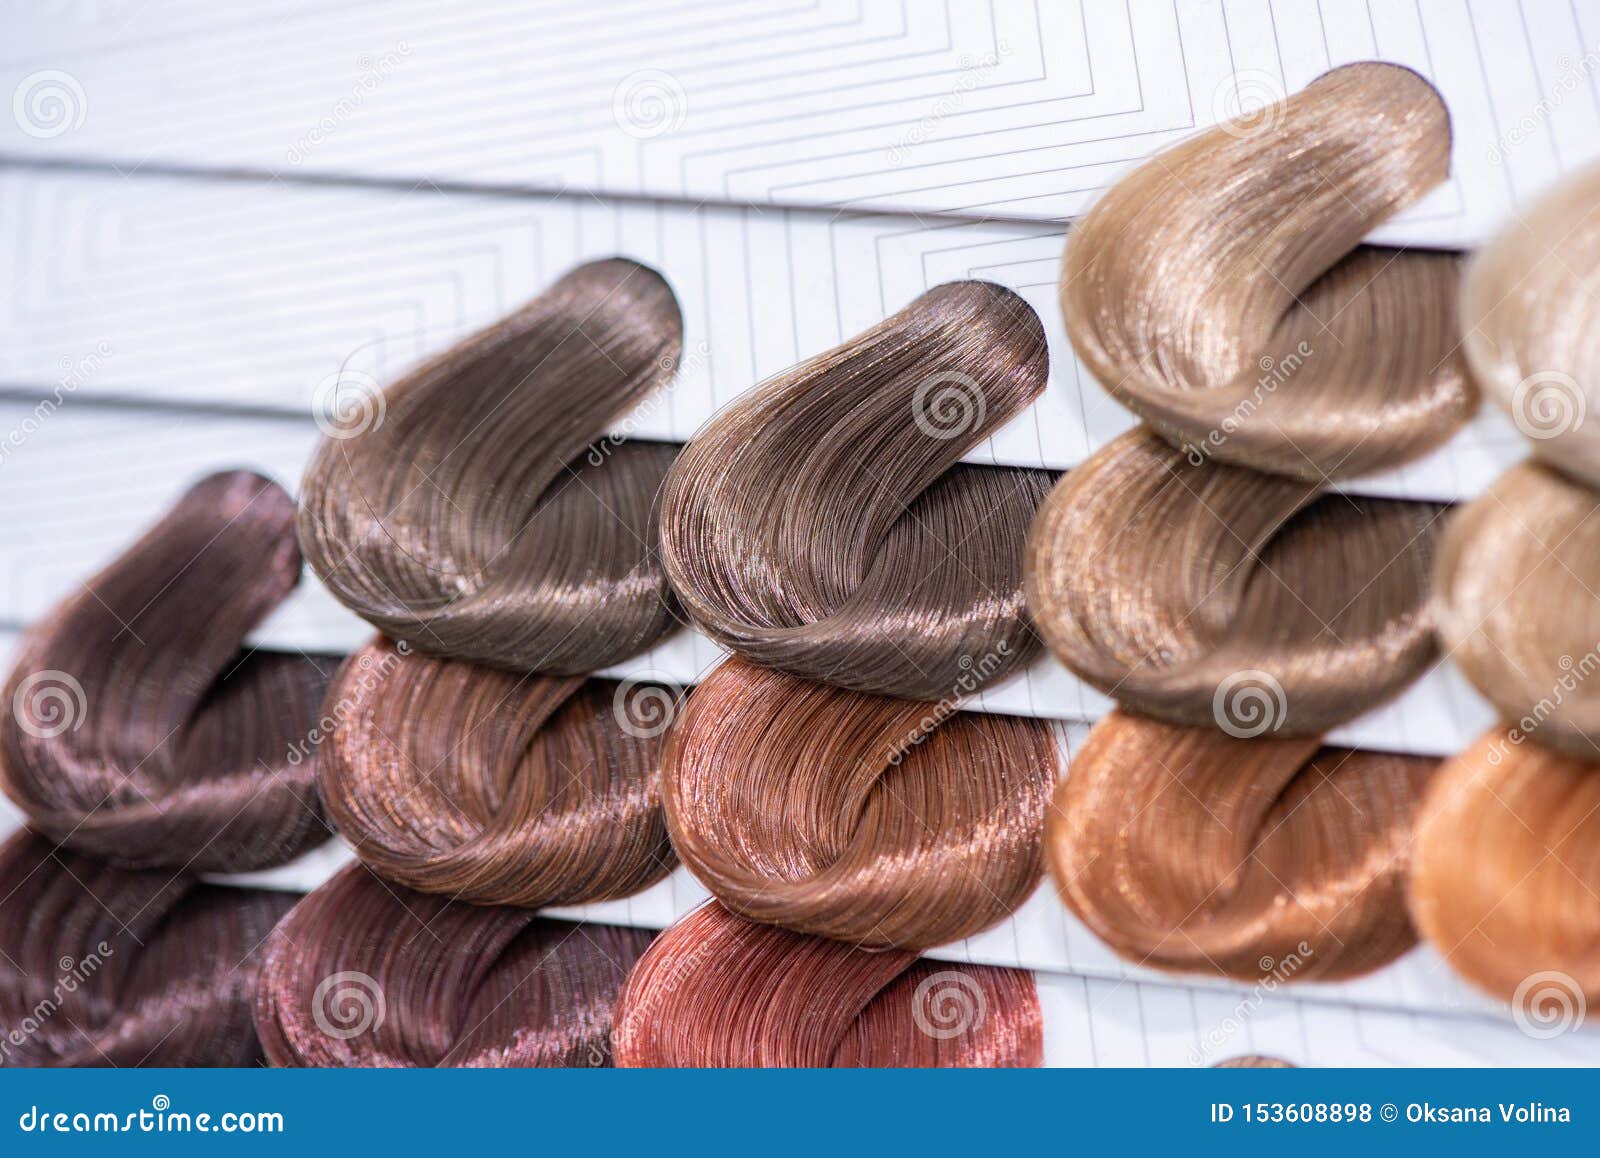 Hair Color Chart Number 4